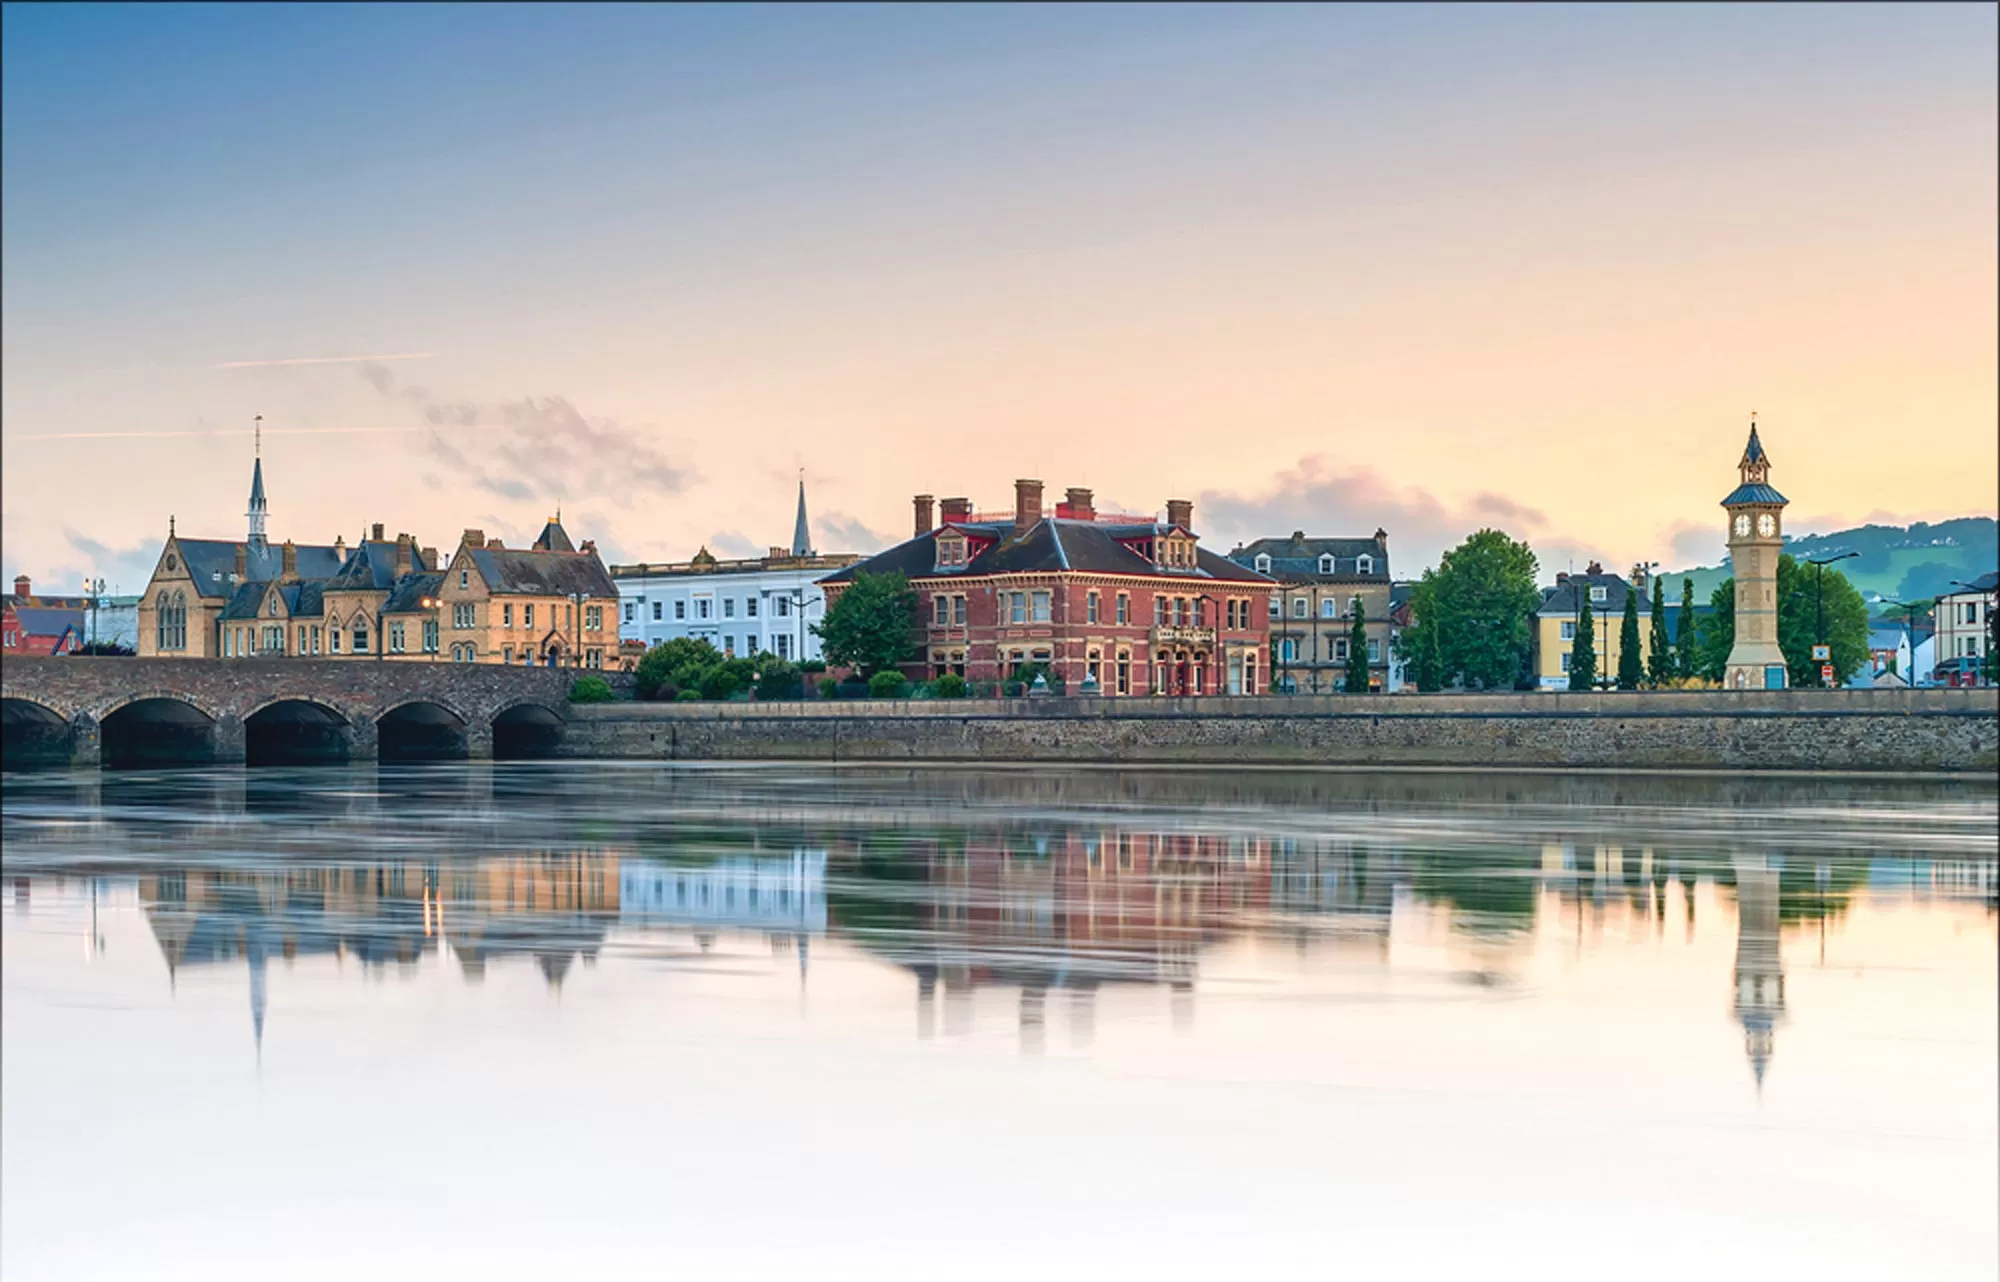 Barnstaple reflected in water - photo by Stephen Ring